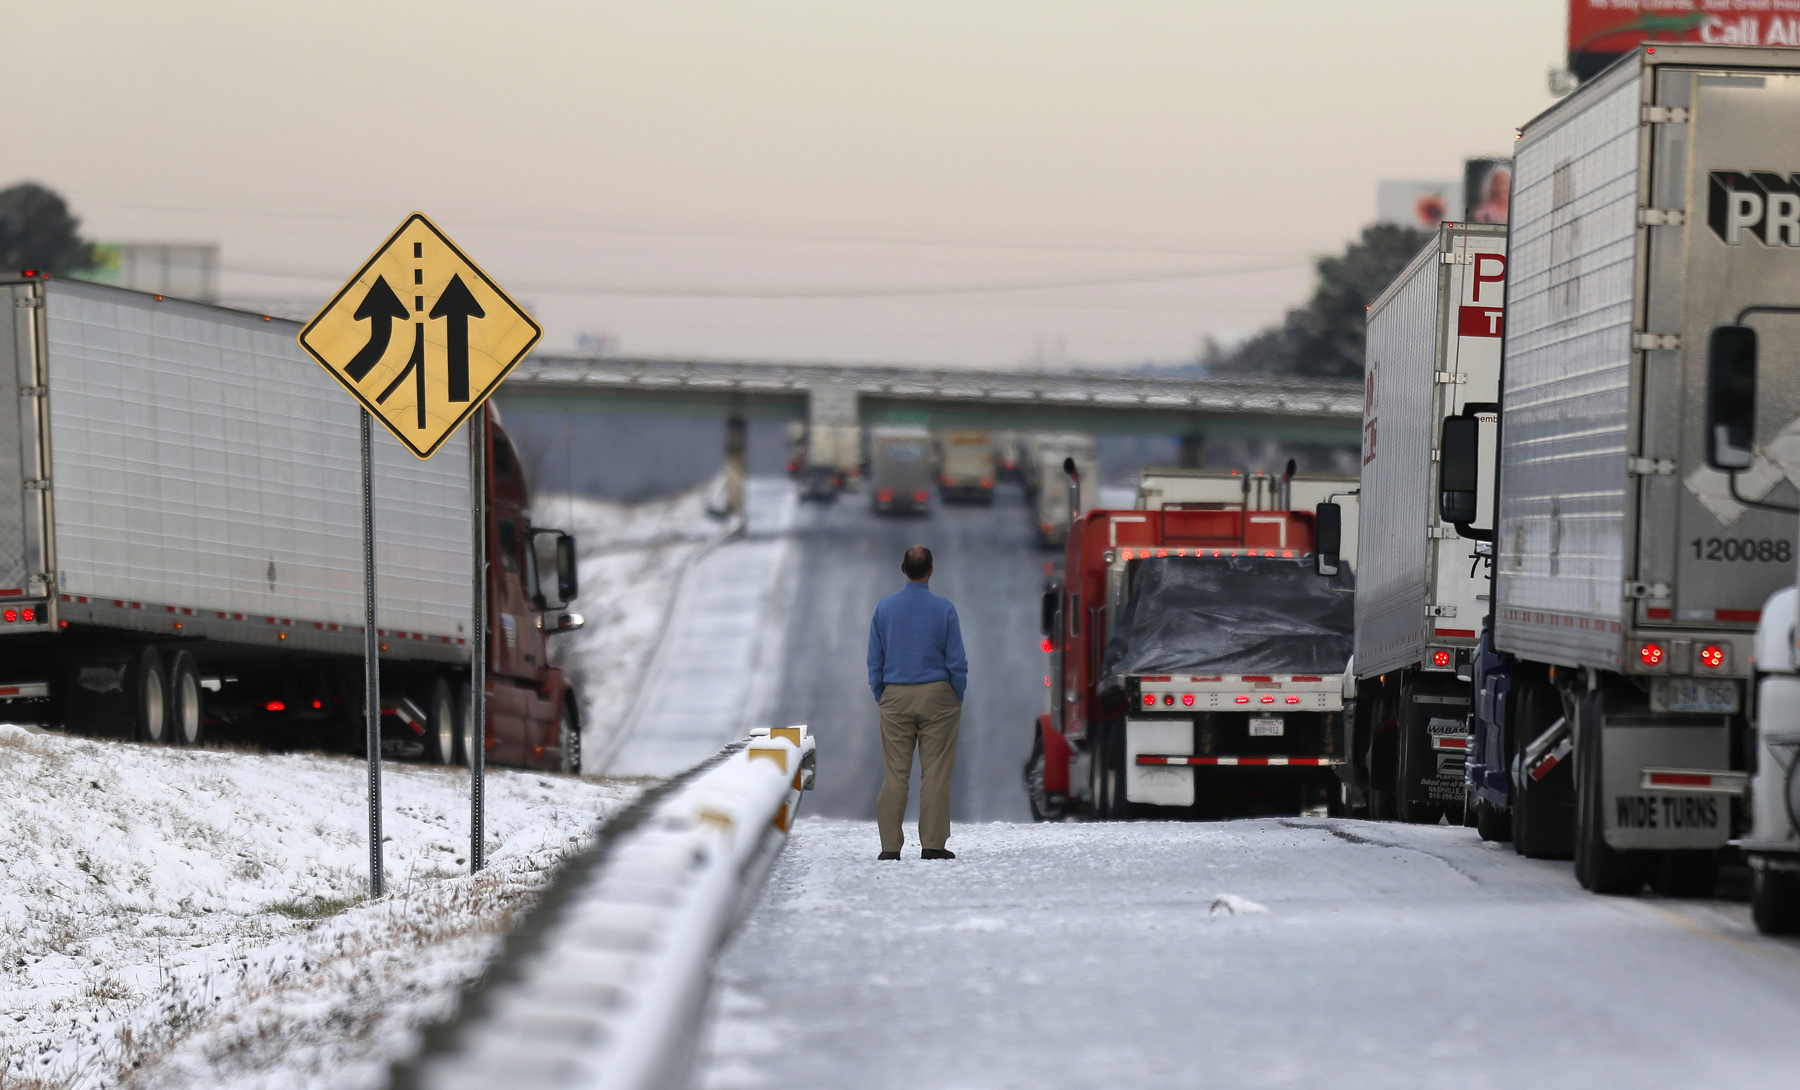 A man stands on the frozen roadway as he waits for traffic to clear along Interstate 75 Wednesday, Jan. 29, 2014, in Macon, Ga.